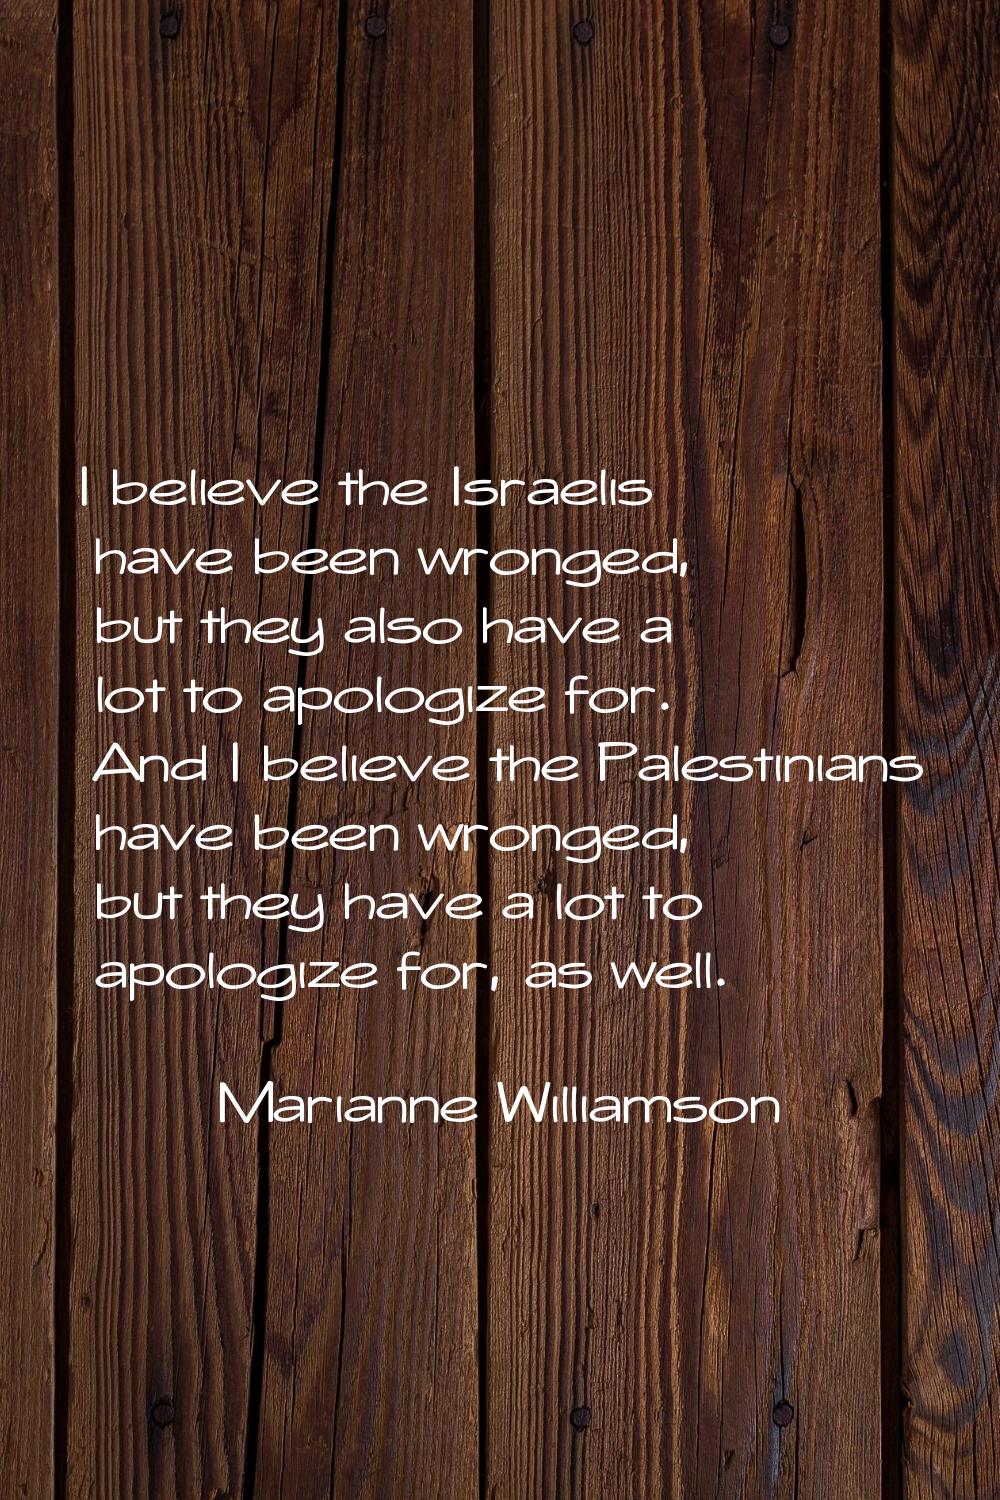 I believe the Israelis have been wronged, but they also have a lot to apologize for. And I believe 